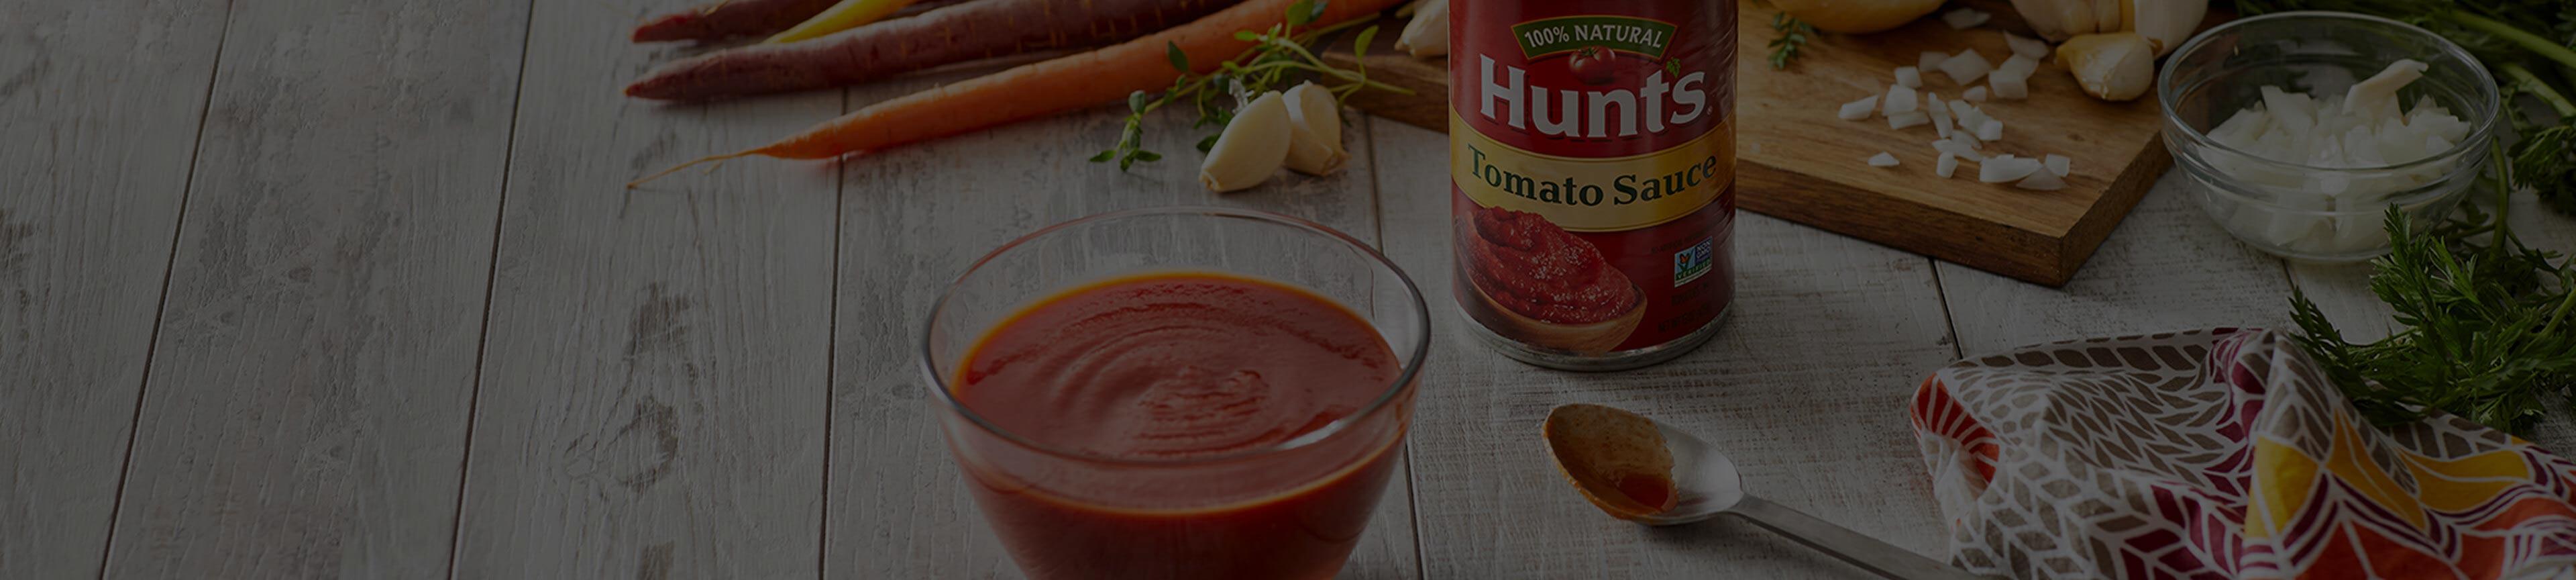 Hunt's Tomato Sauce in a bowl next to a spoon on a table